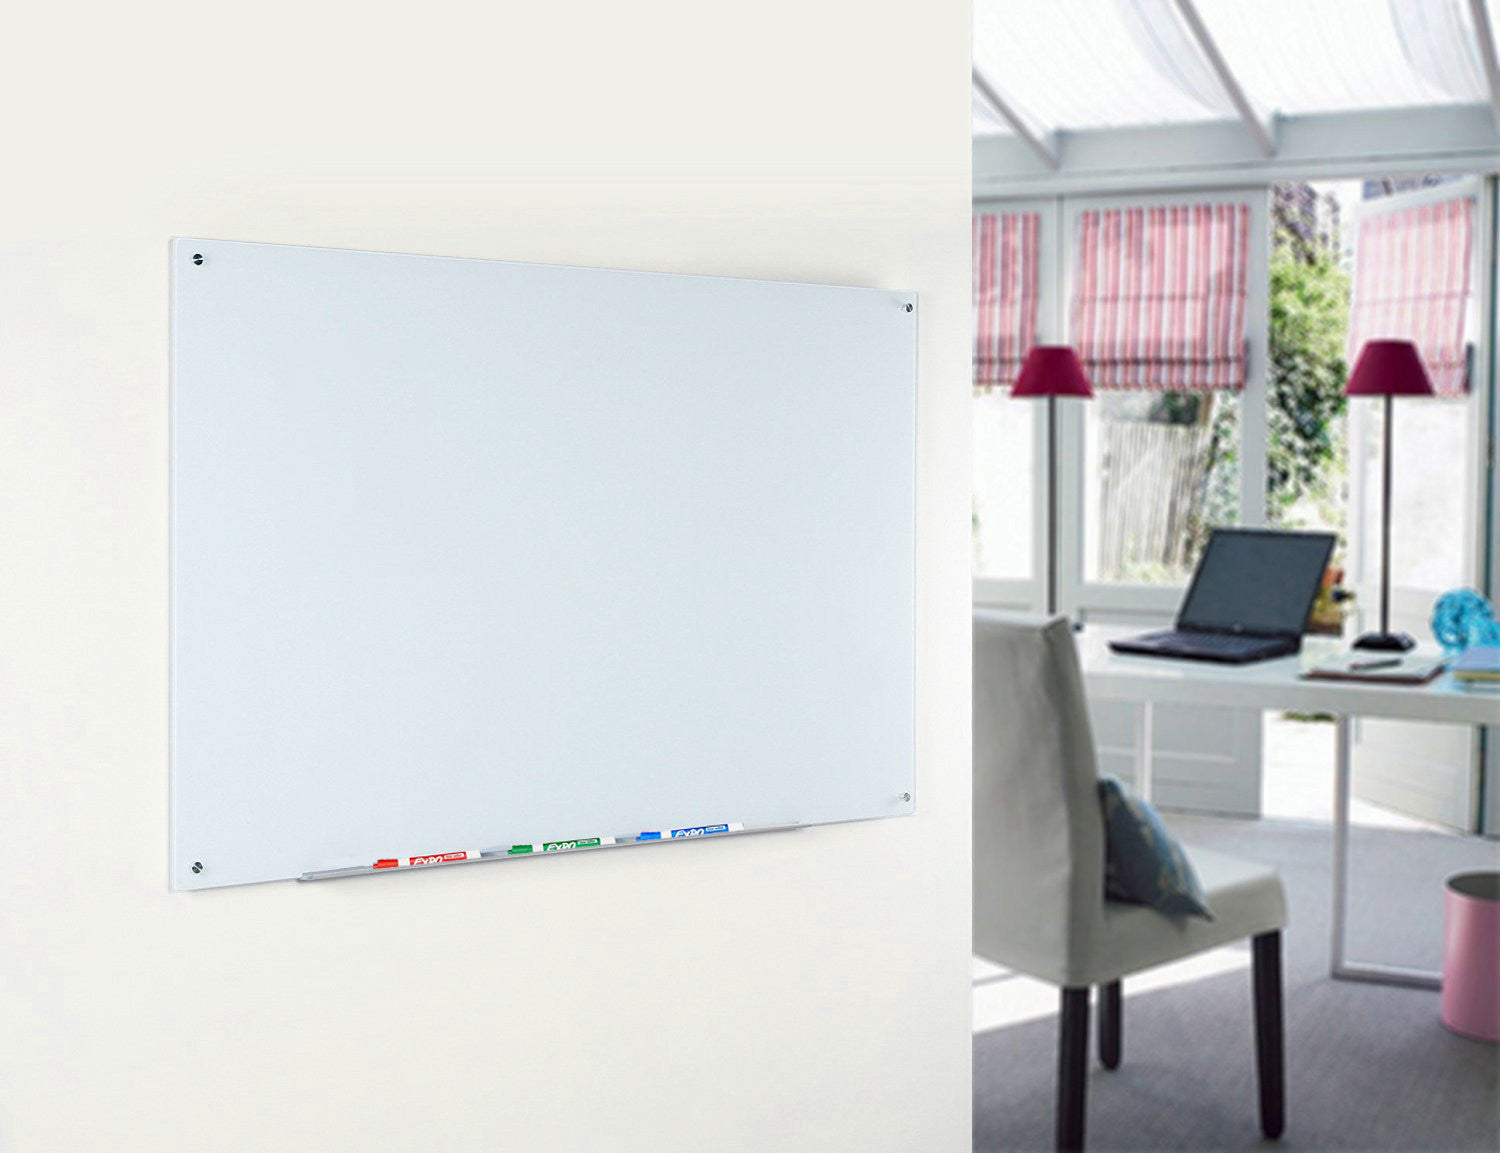 Magnetic Ultra White Glass Dry-Erase Board Set - Includes Board, Magnets, and Marker Tray. 3' x 4' shown in a home office setting. 